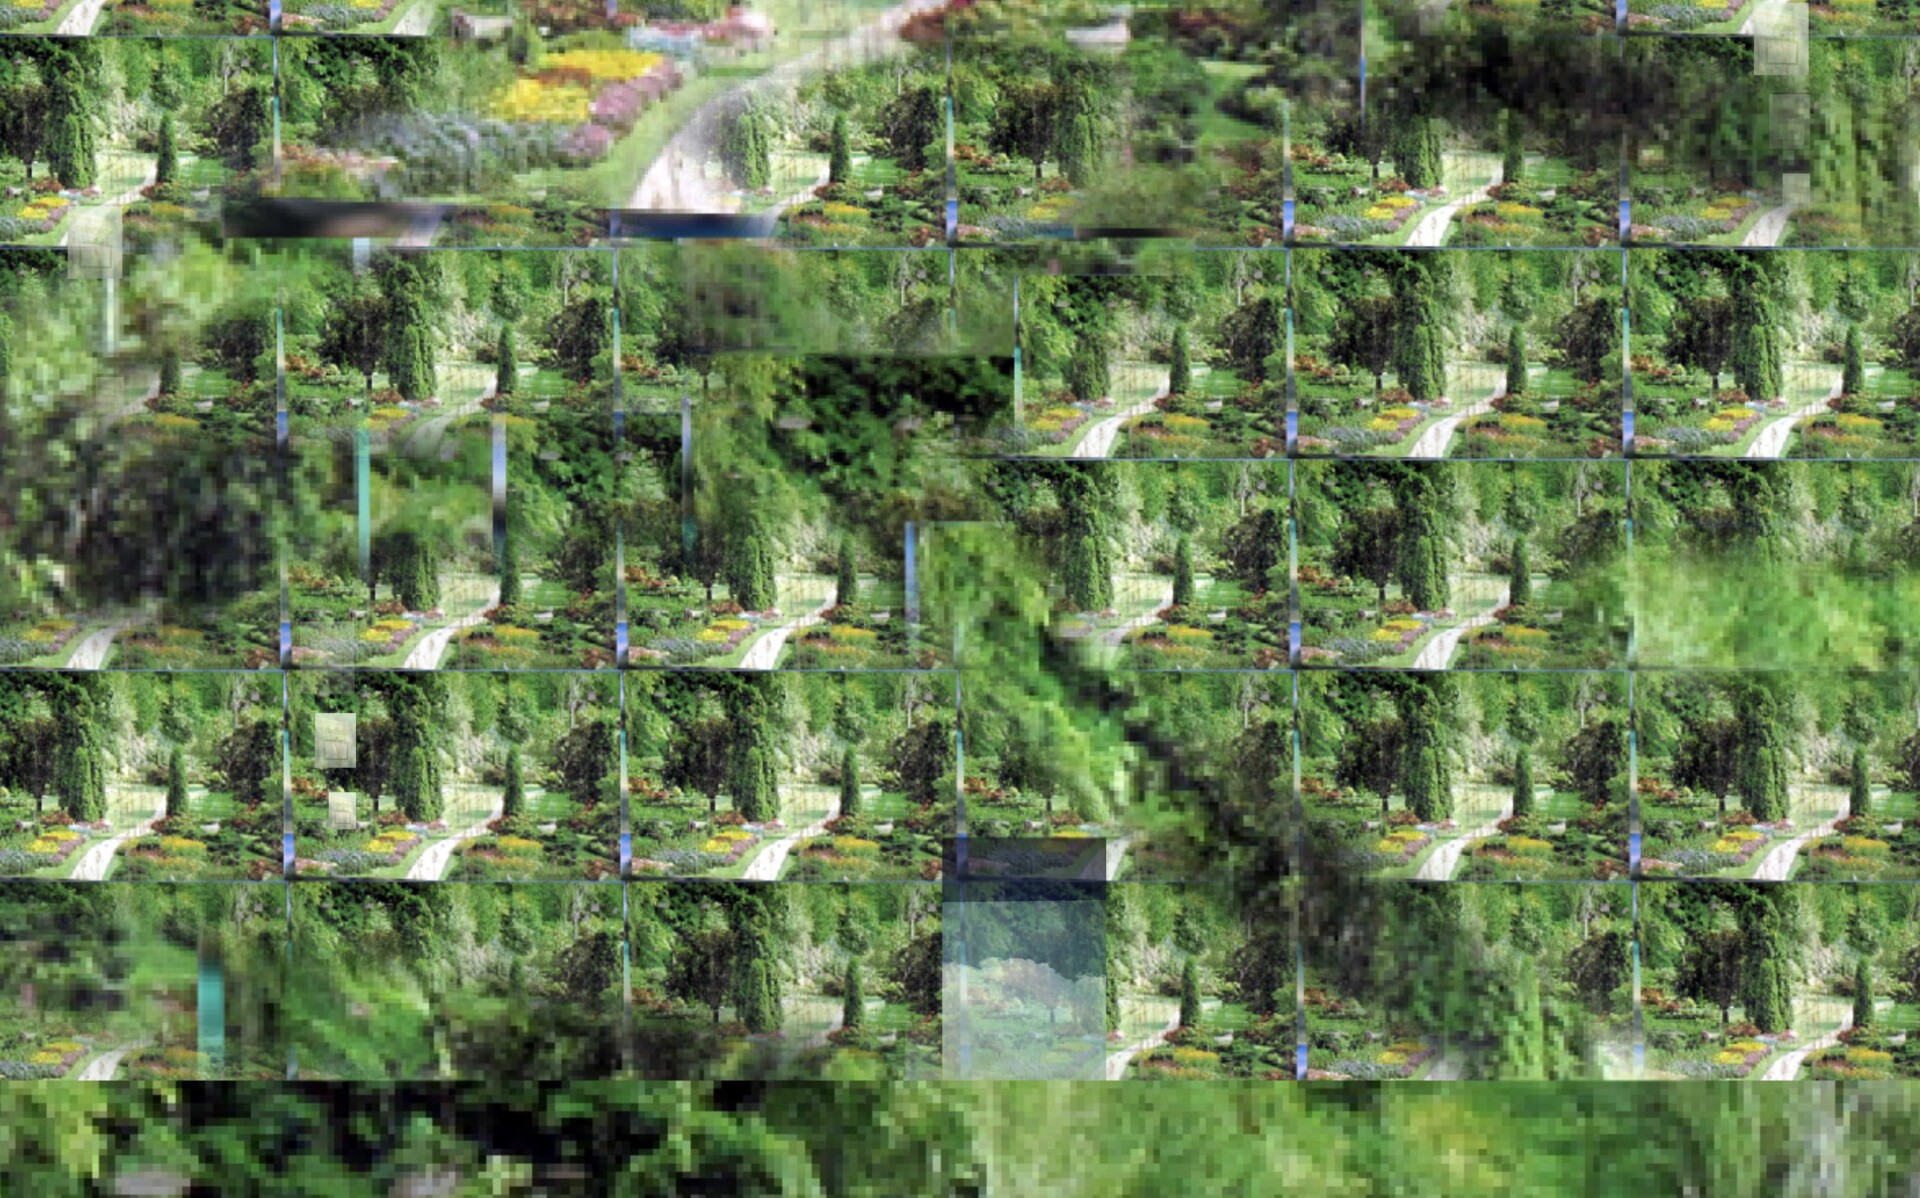 A grid of repeated images of a grassy area